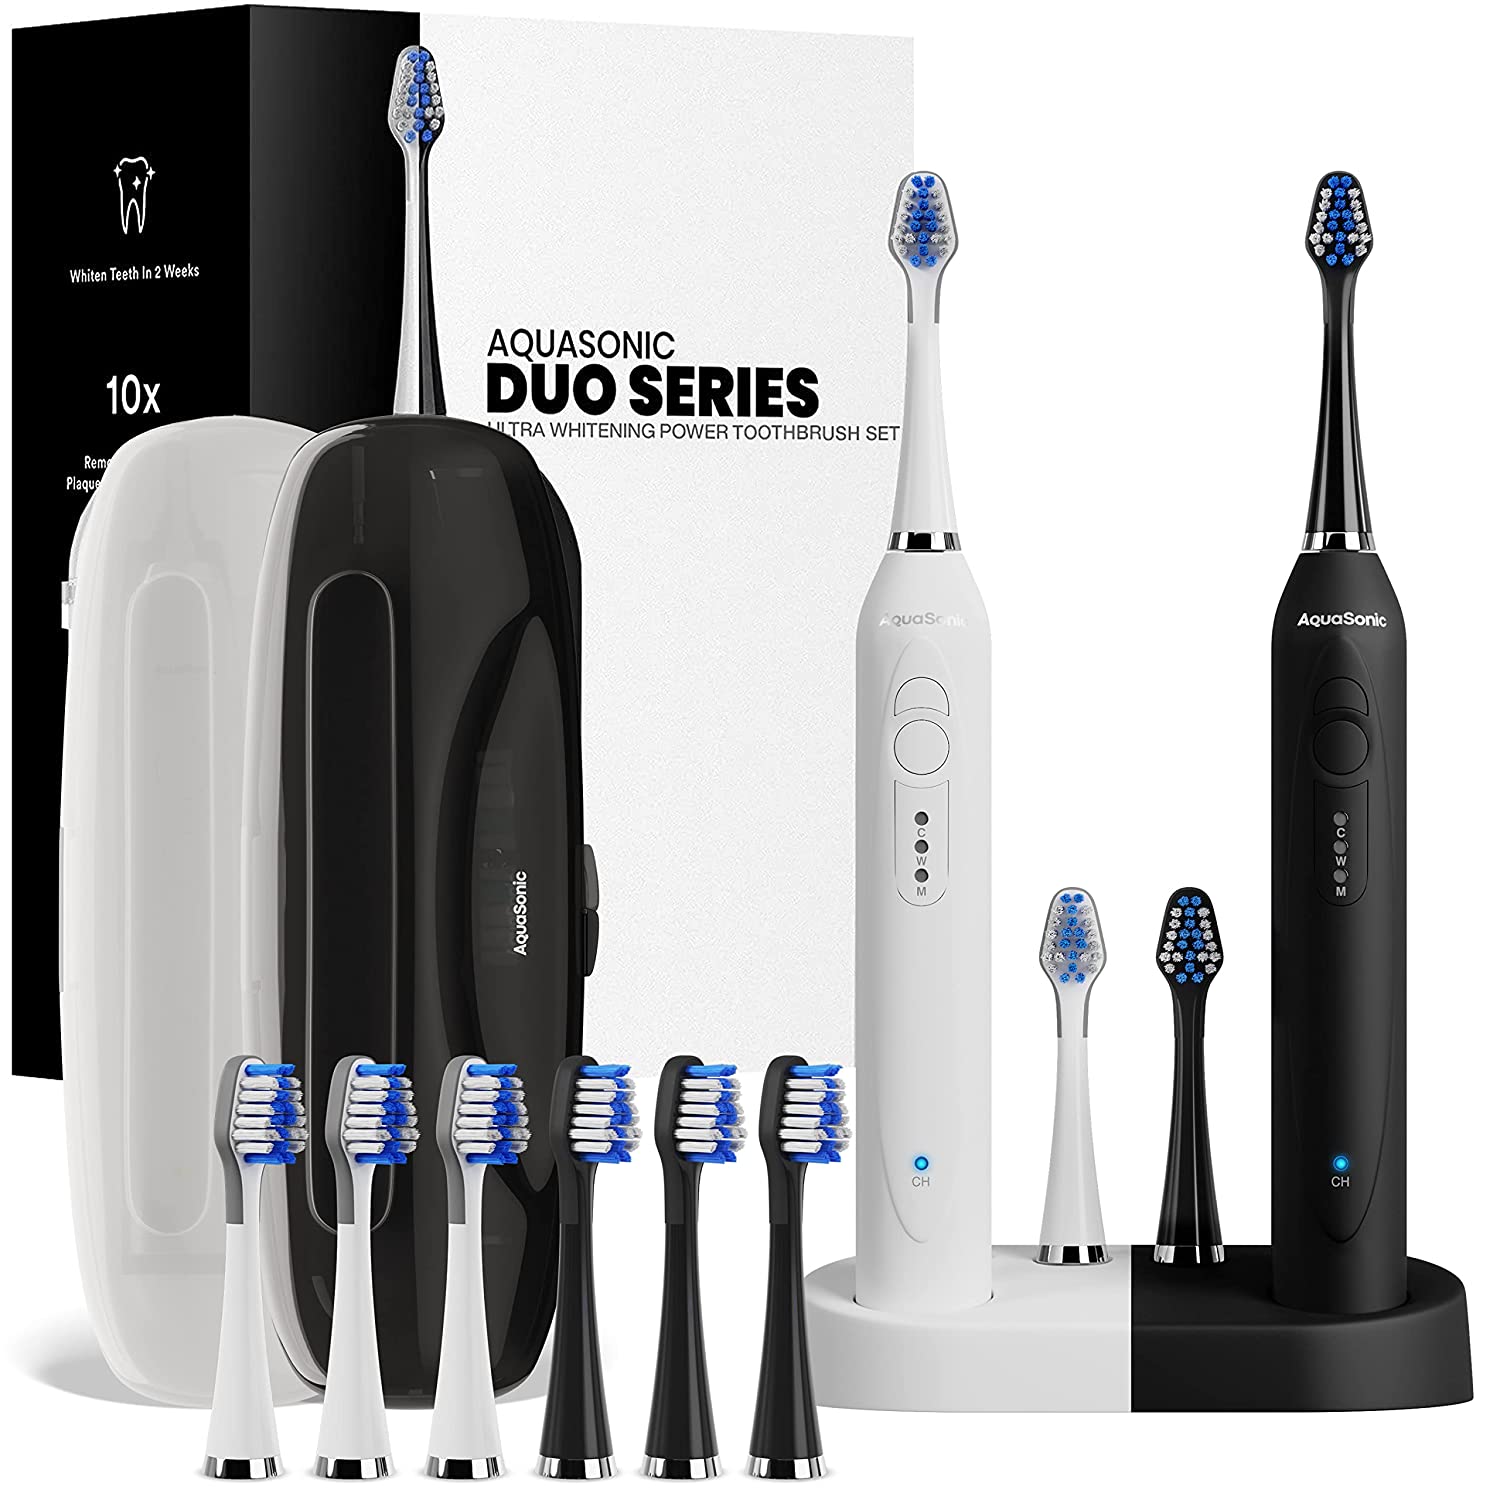 Aquasonic Electric ToothBrush Duo Series with 10 DuPont Brush Heads & 2 Travel Cases - image 1 of 7